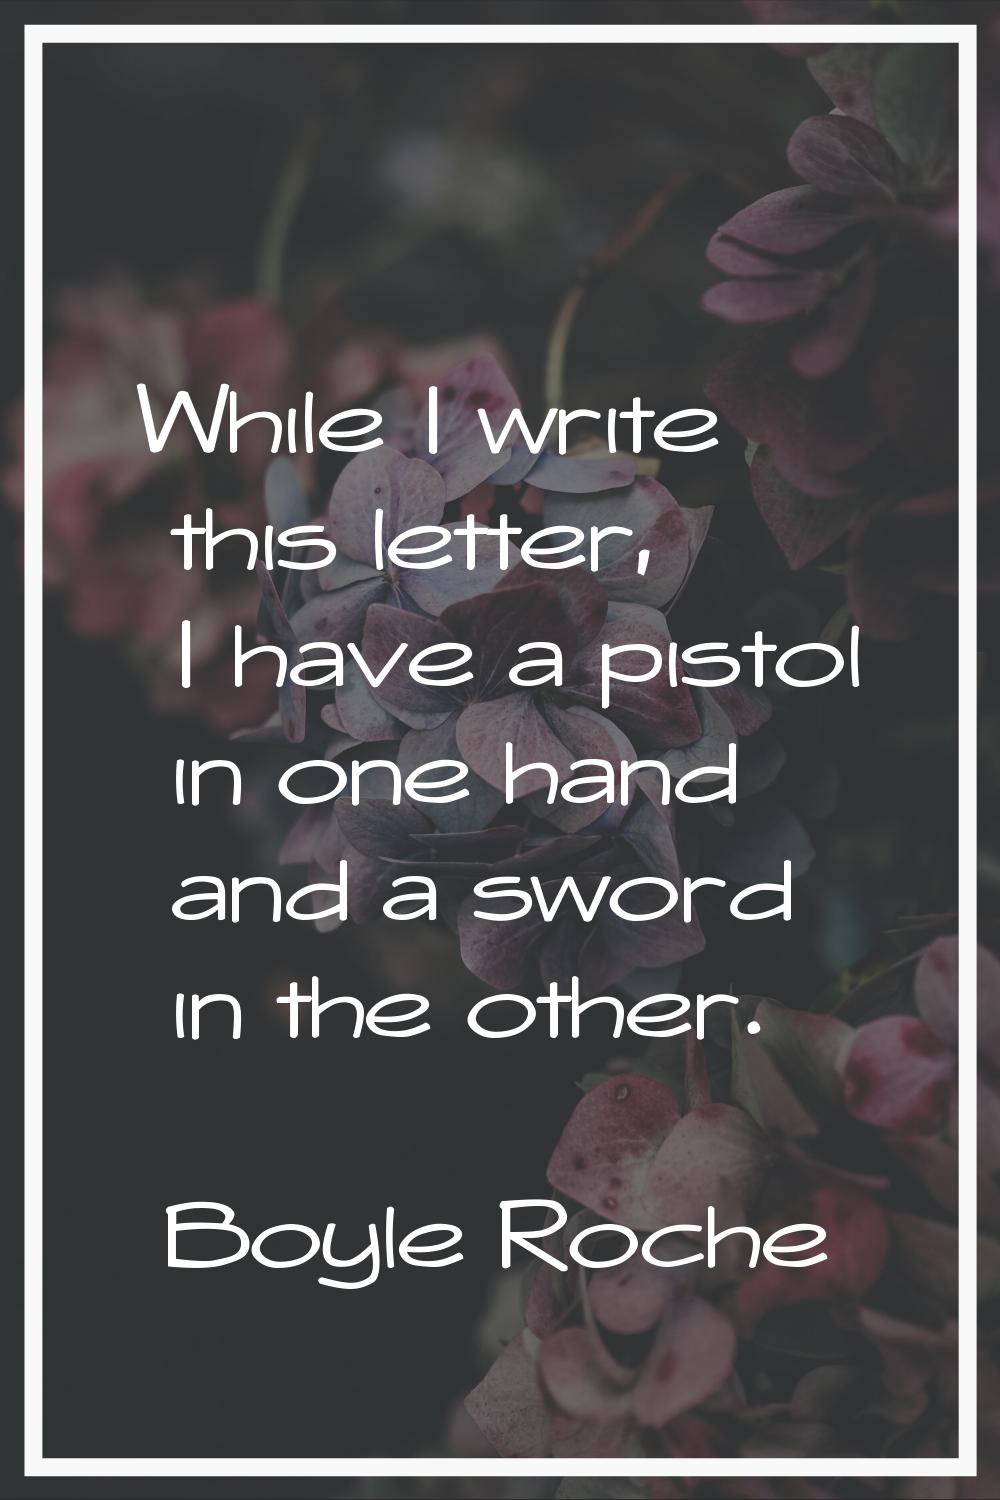 While I write this letter, I have a pistol in one hand and a sword in the other.